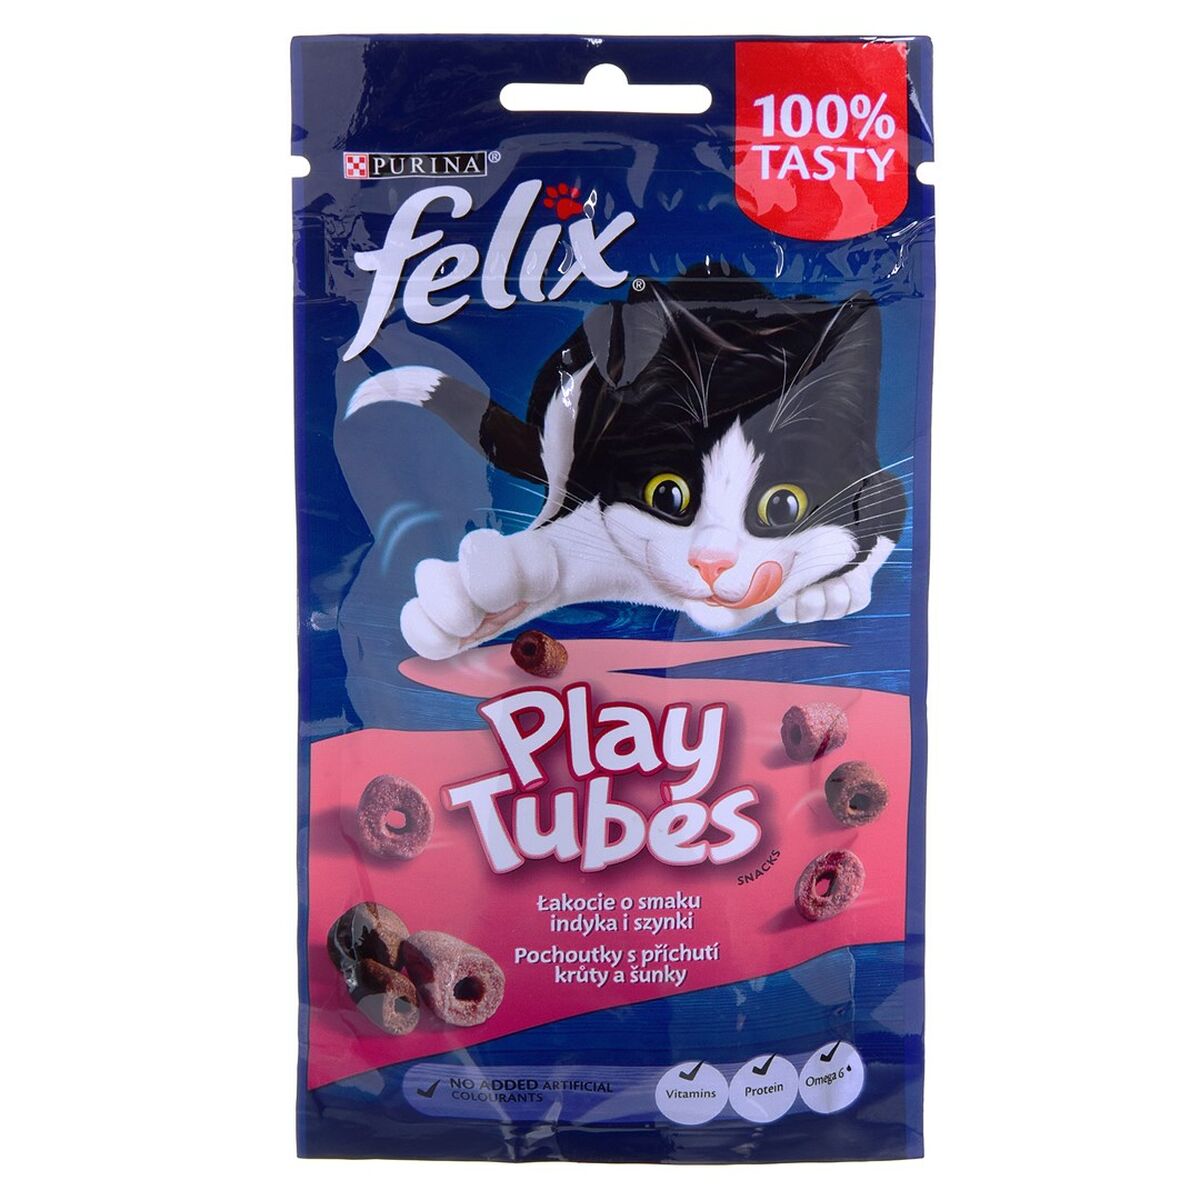 Aliments pour chat Purina Play Tubes Dinde Jambon